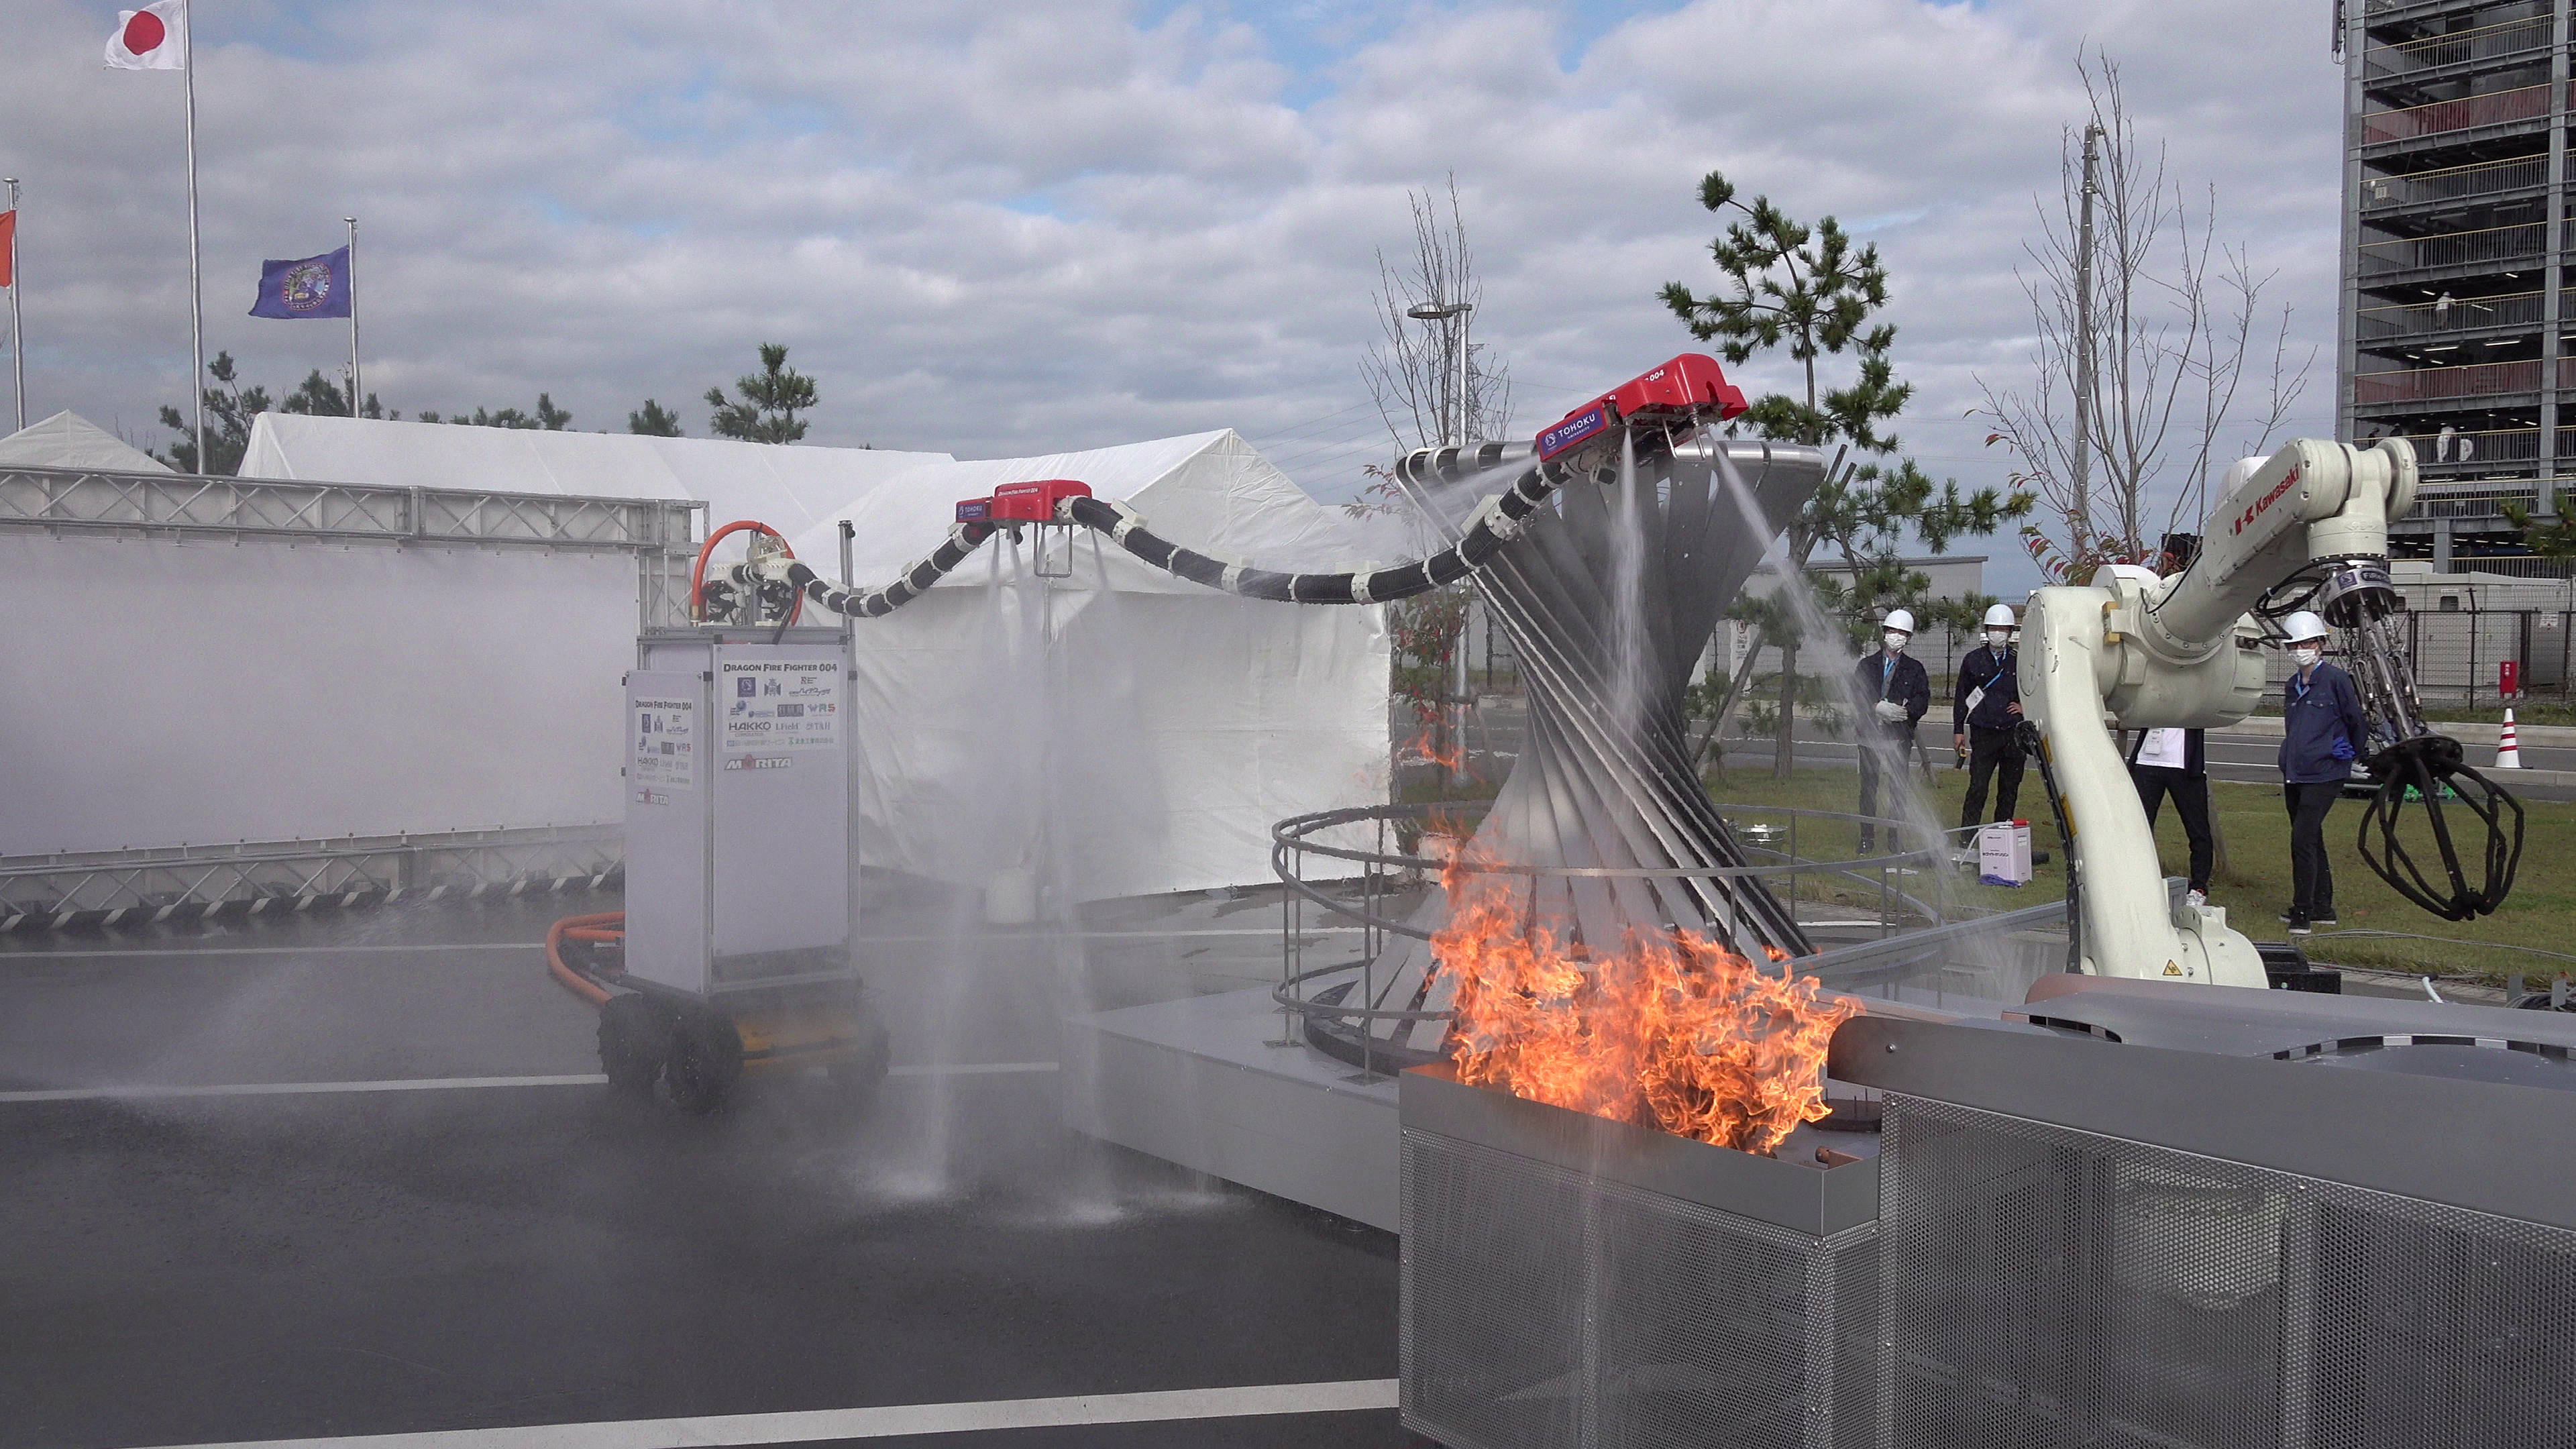 Dragon Firefighter: Revolutionizing Firefighting with Flying Robots